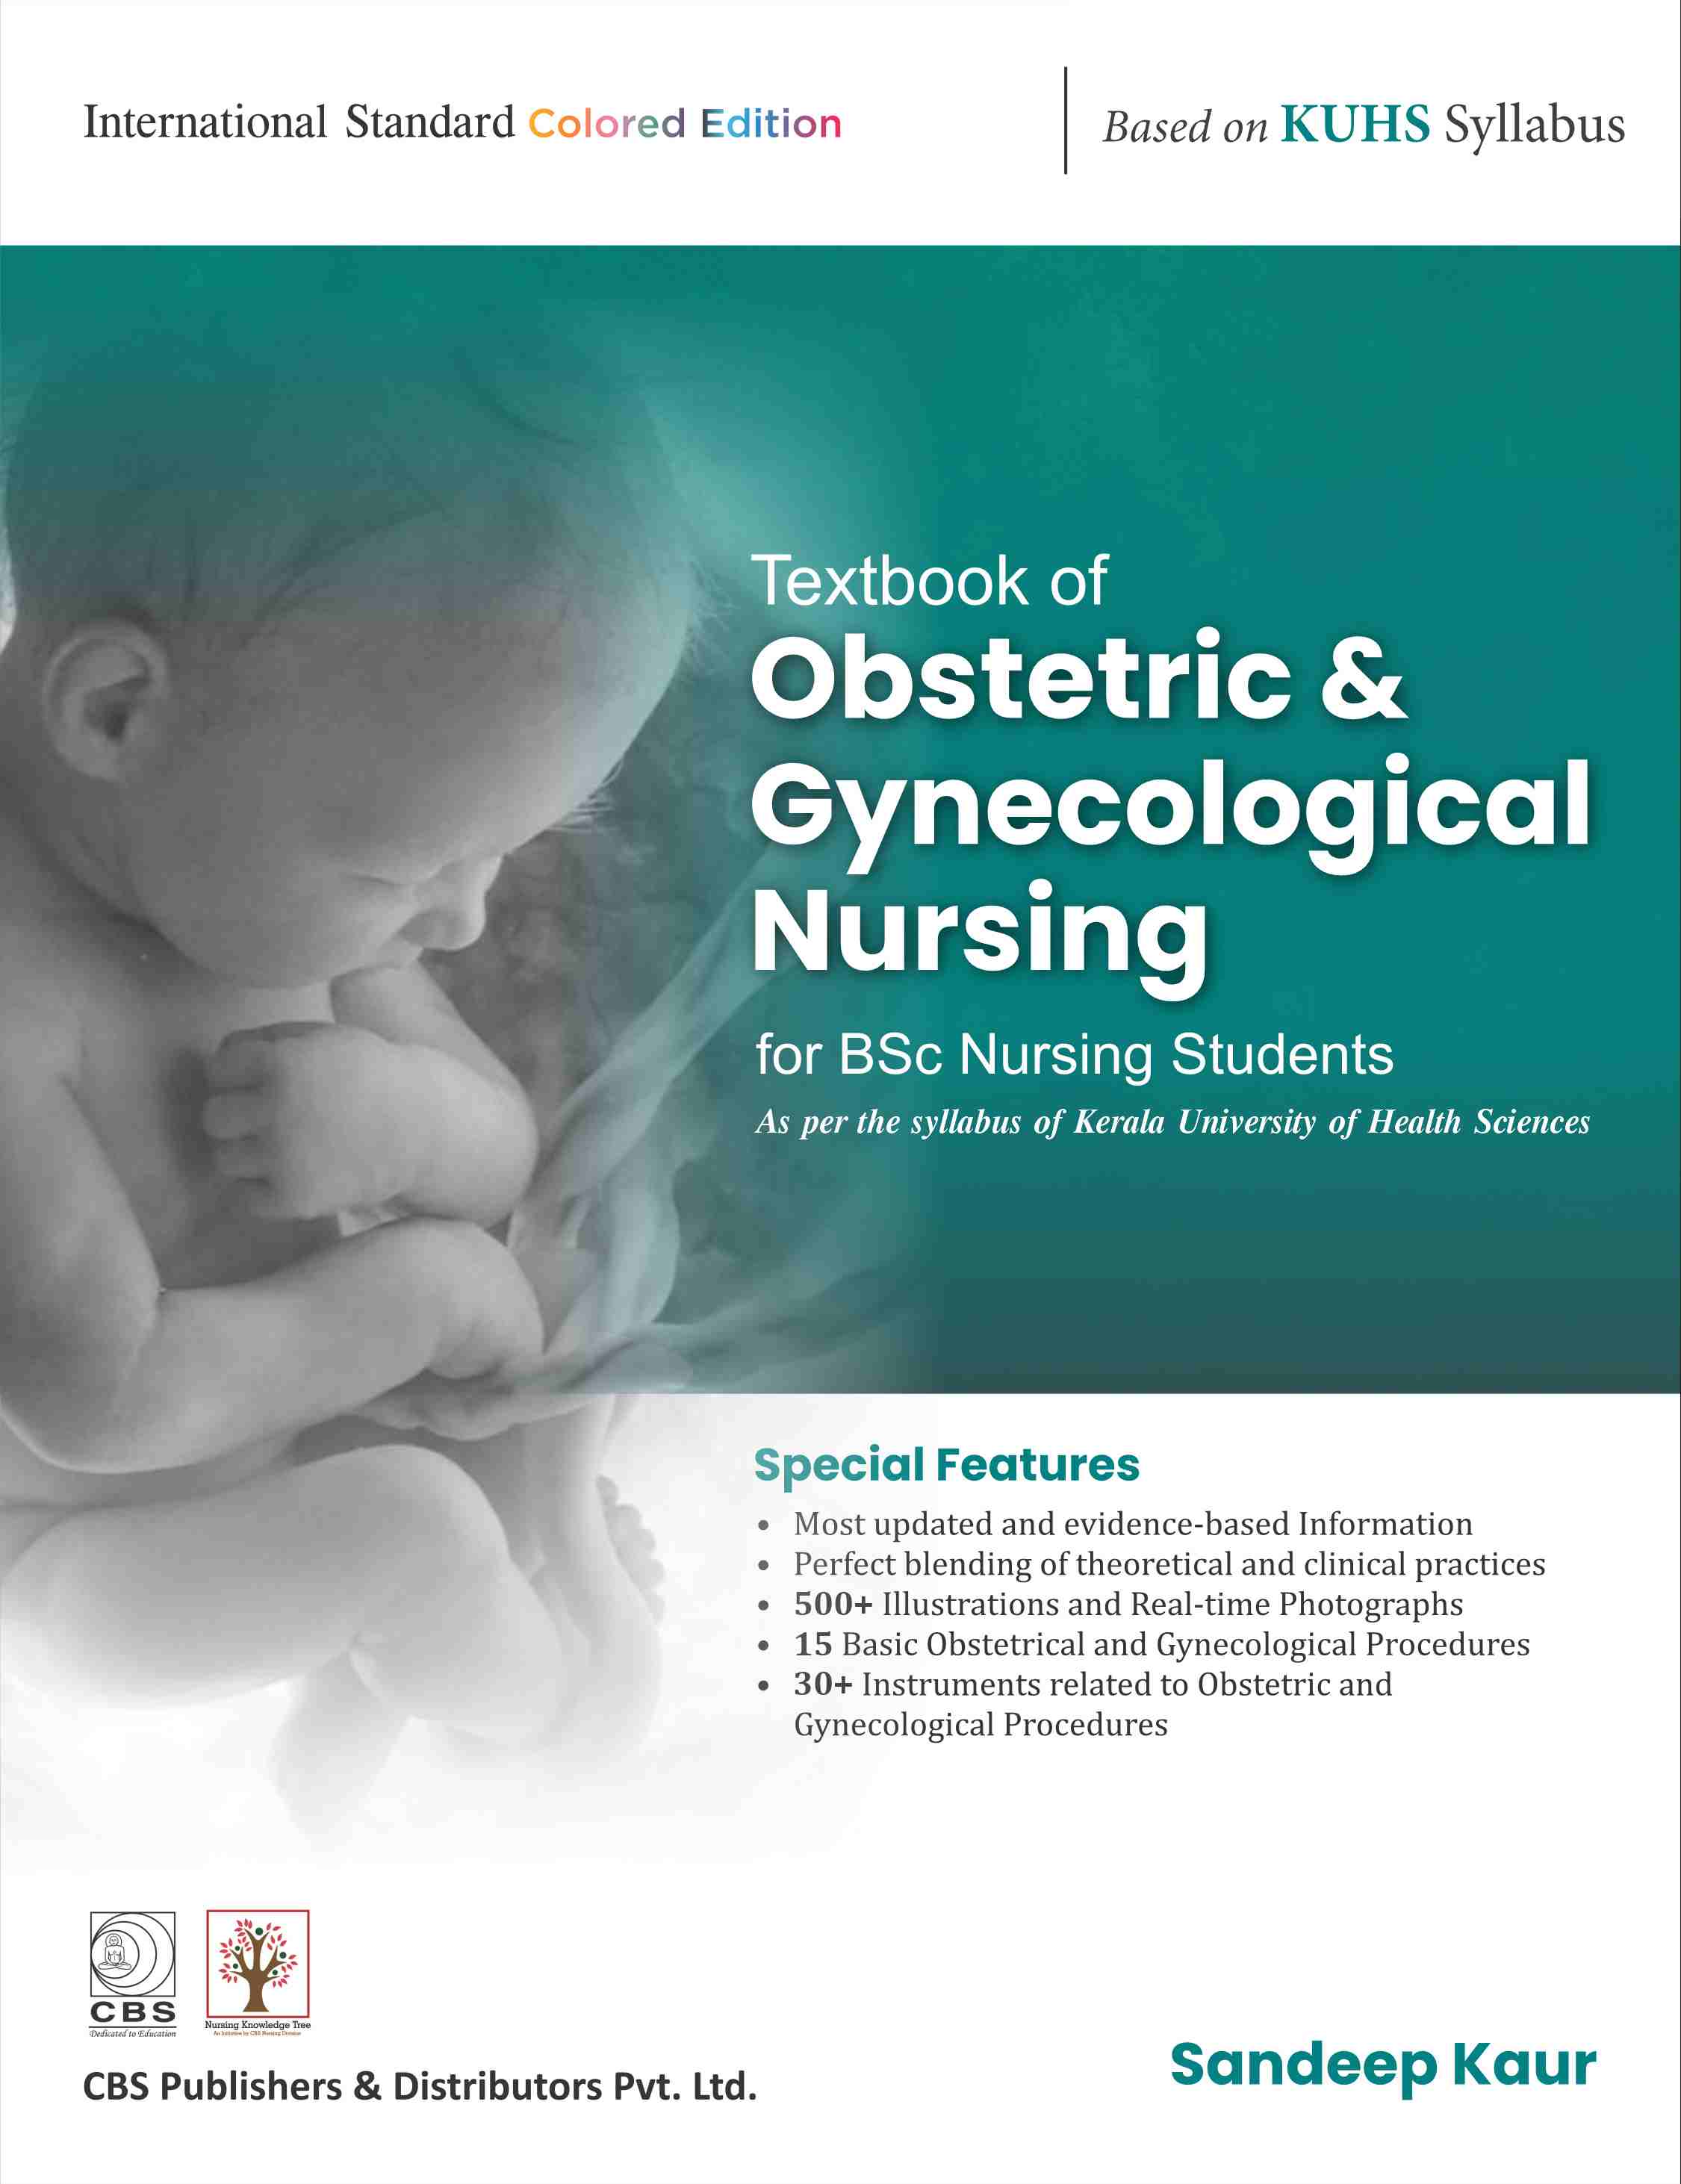 TEXTBOOK OF OBSTETRIC AND GYNECOLOGICAL NURSING FOR BSC NURSING STUDENTS AS PER SYLLABUS KUHS (PB 2022)- ISBN: 9789390619481